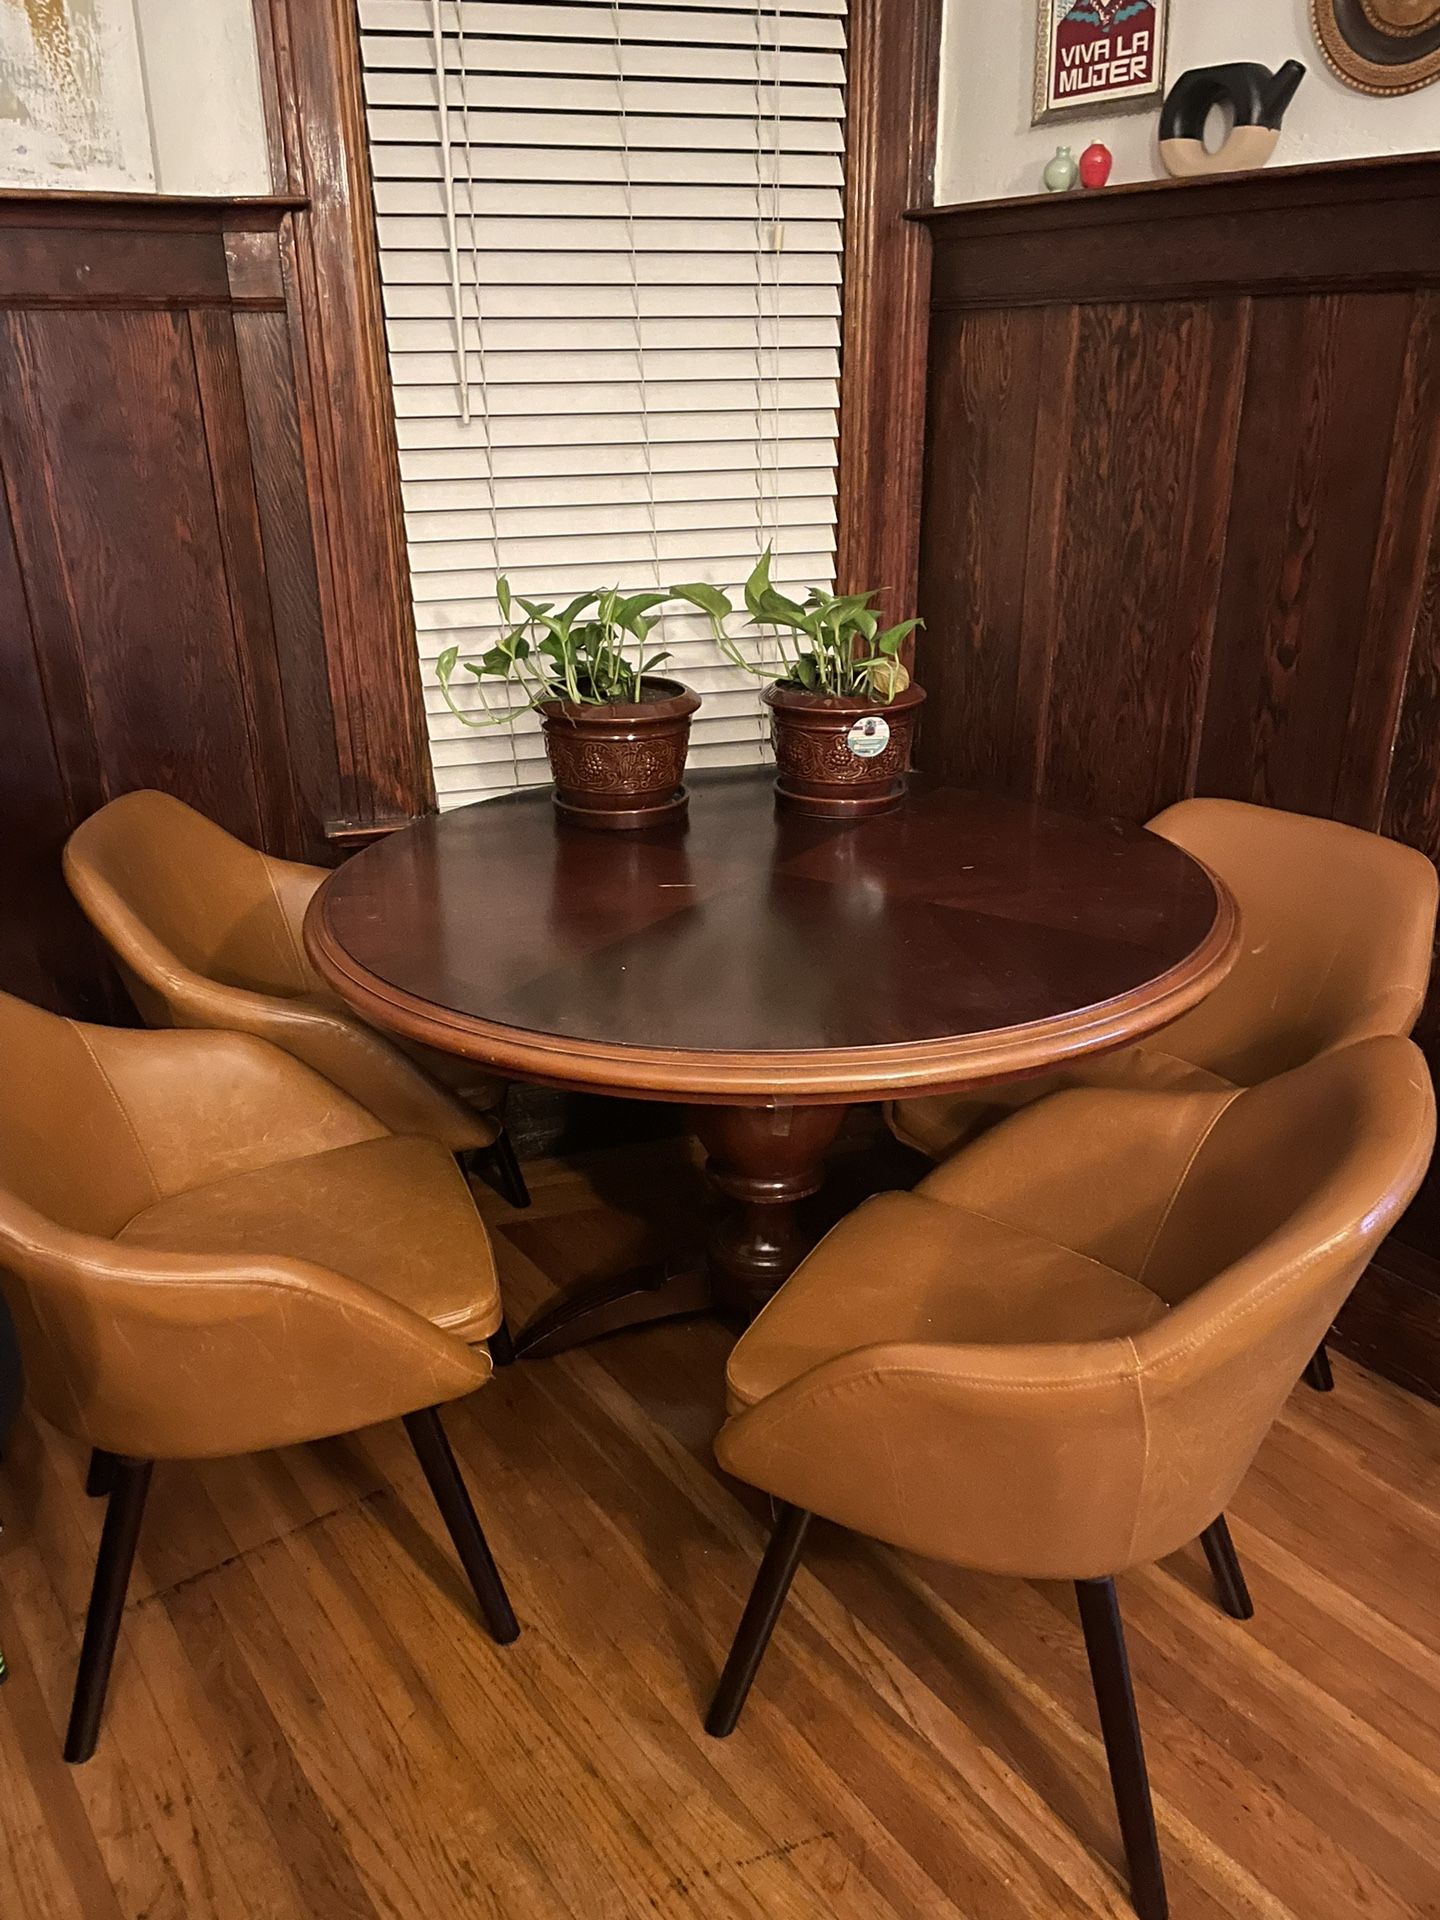 Claw foot Round Wood Table w/ 4 Leather Chairs